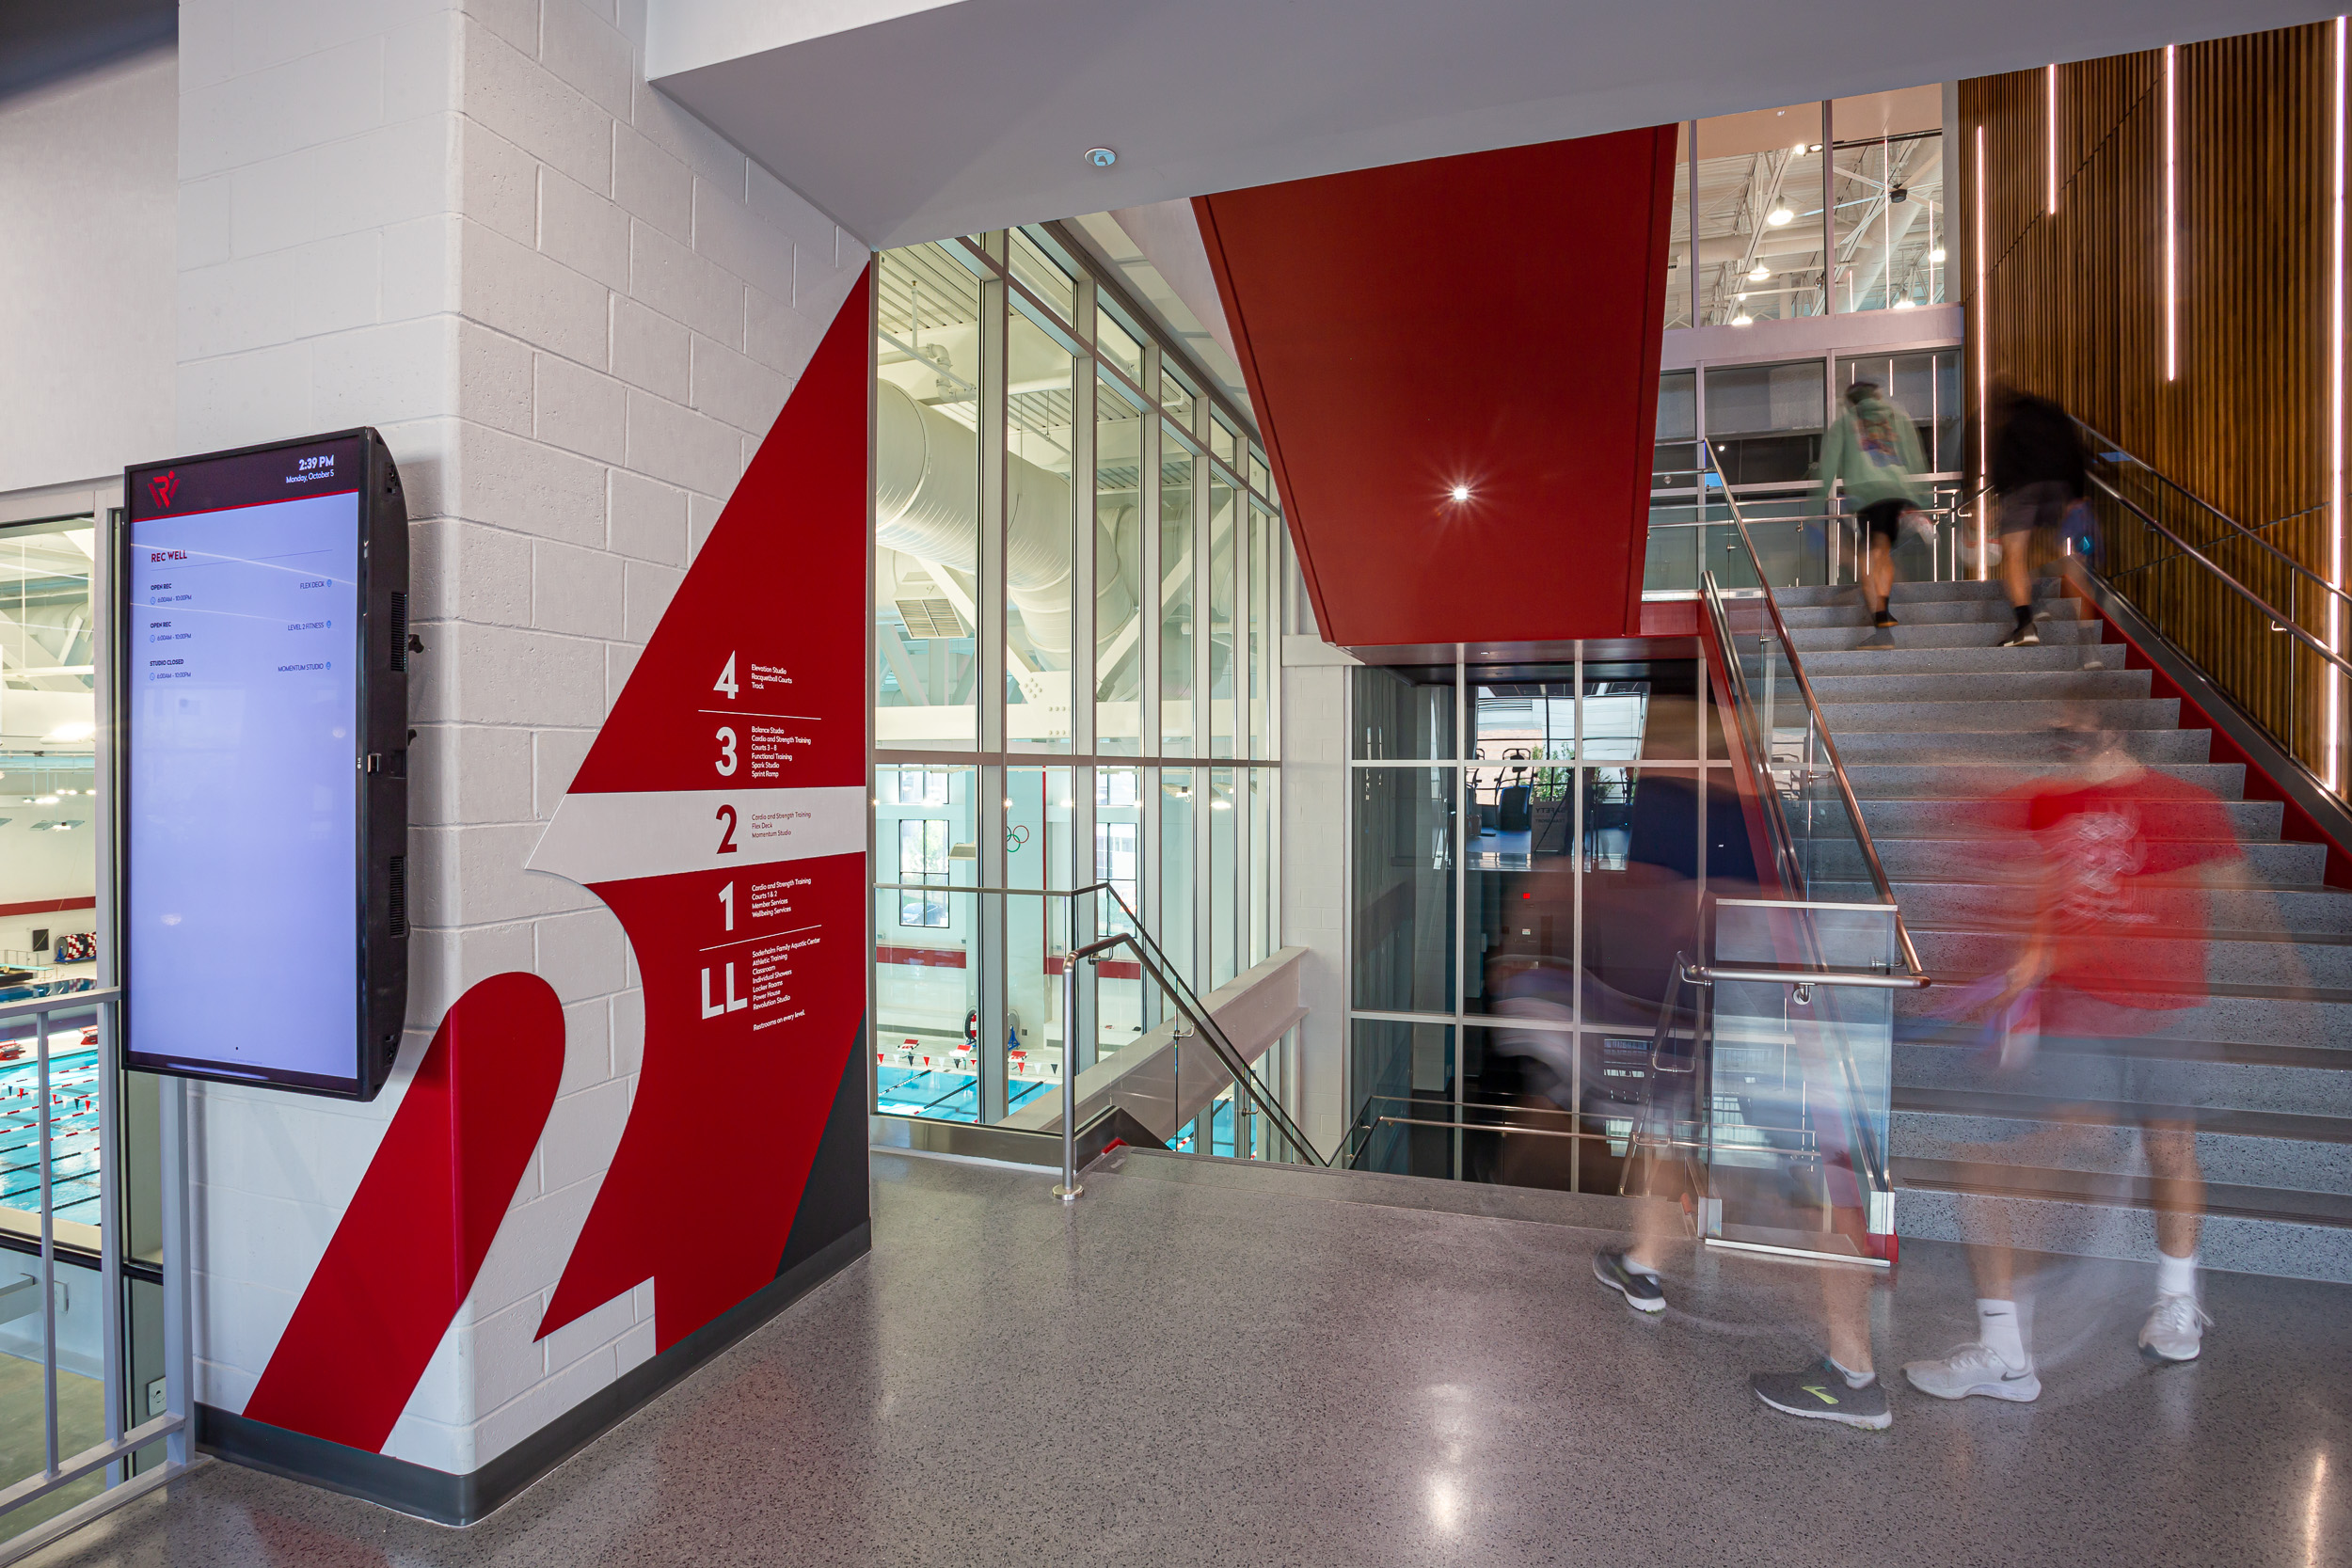 University Of Wisconsin - Recreation & Wellbeing Level Two Wayfinding Signage